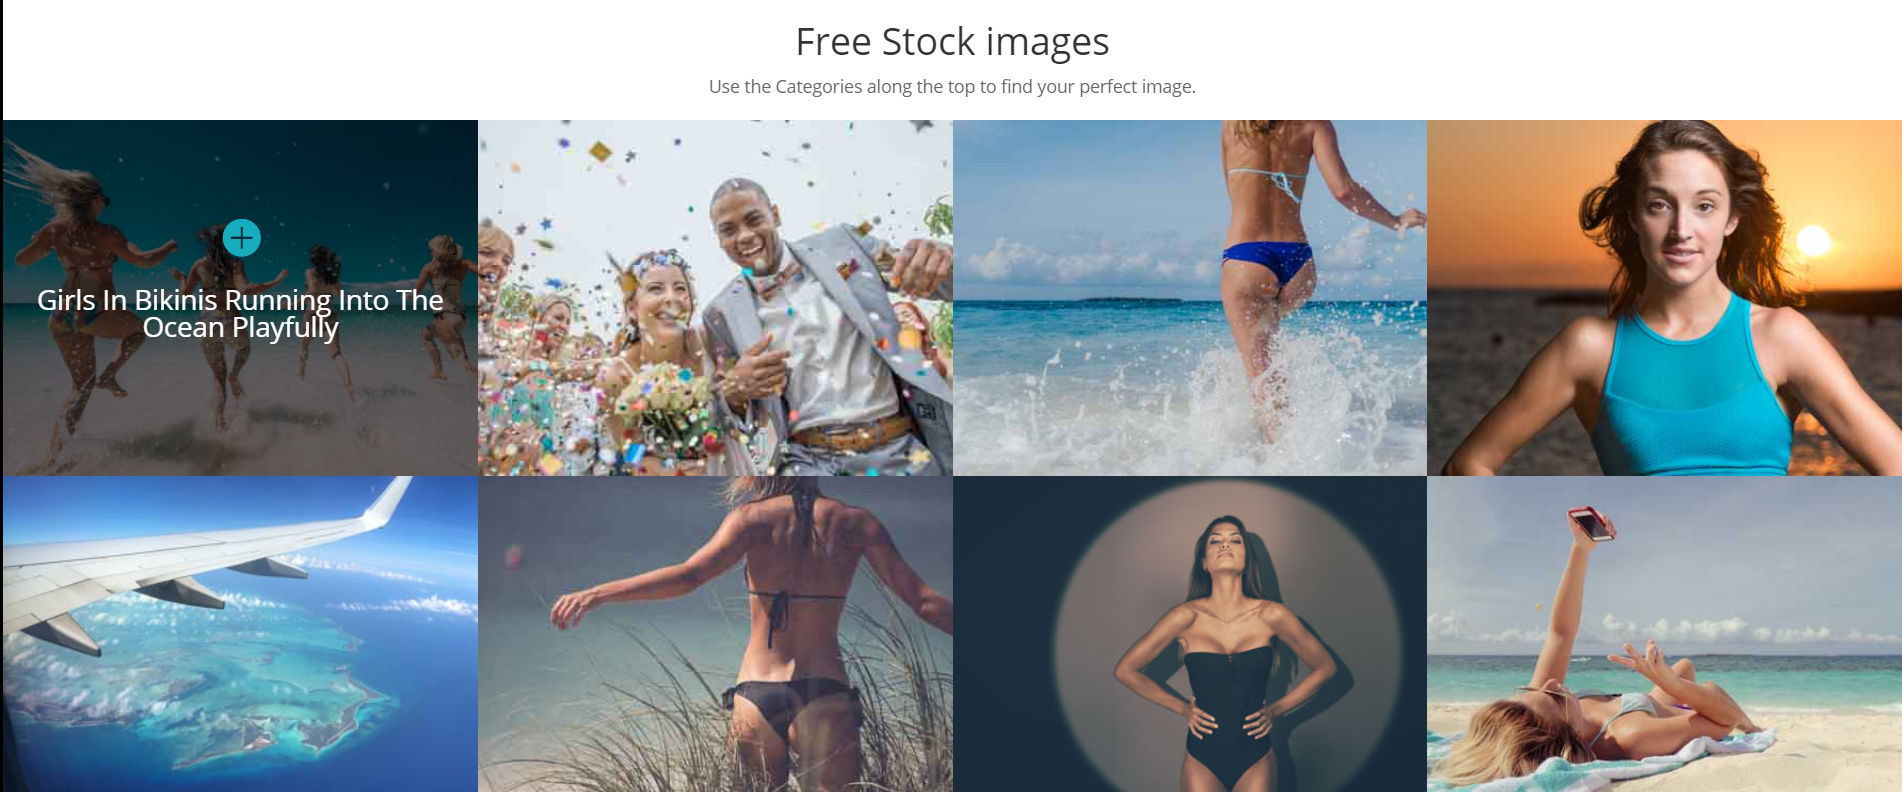 stokpik images for free